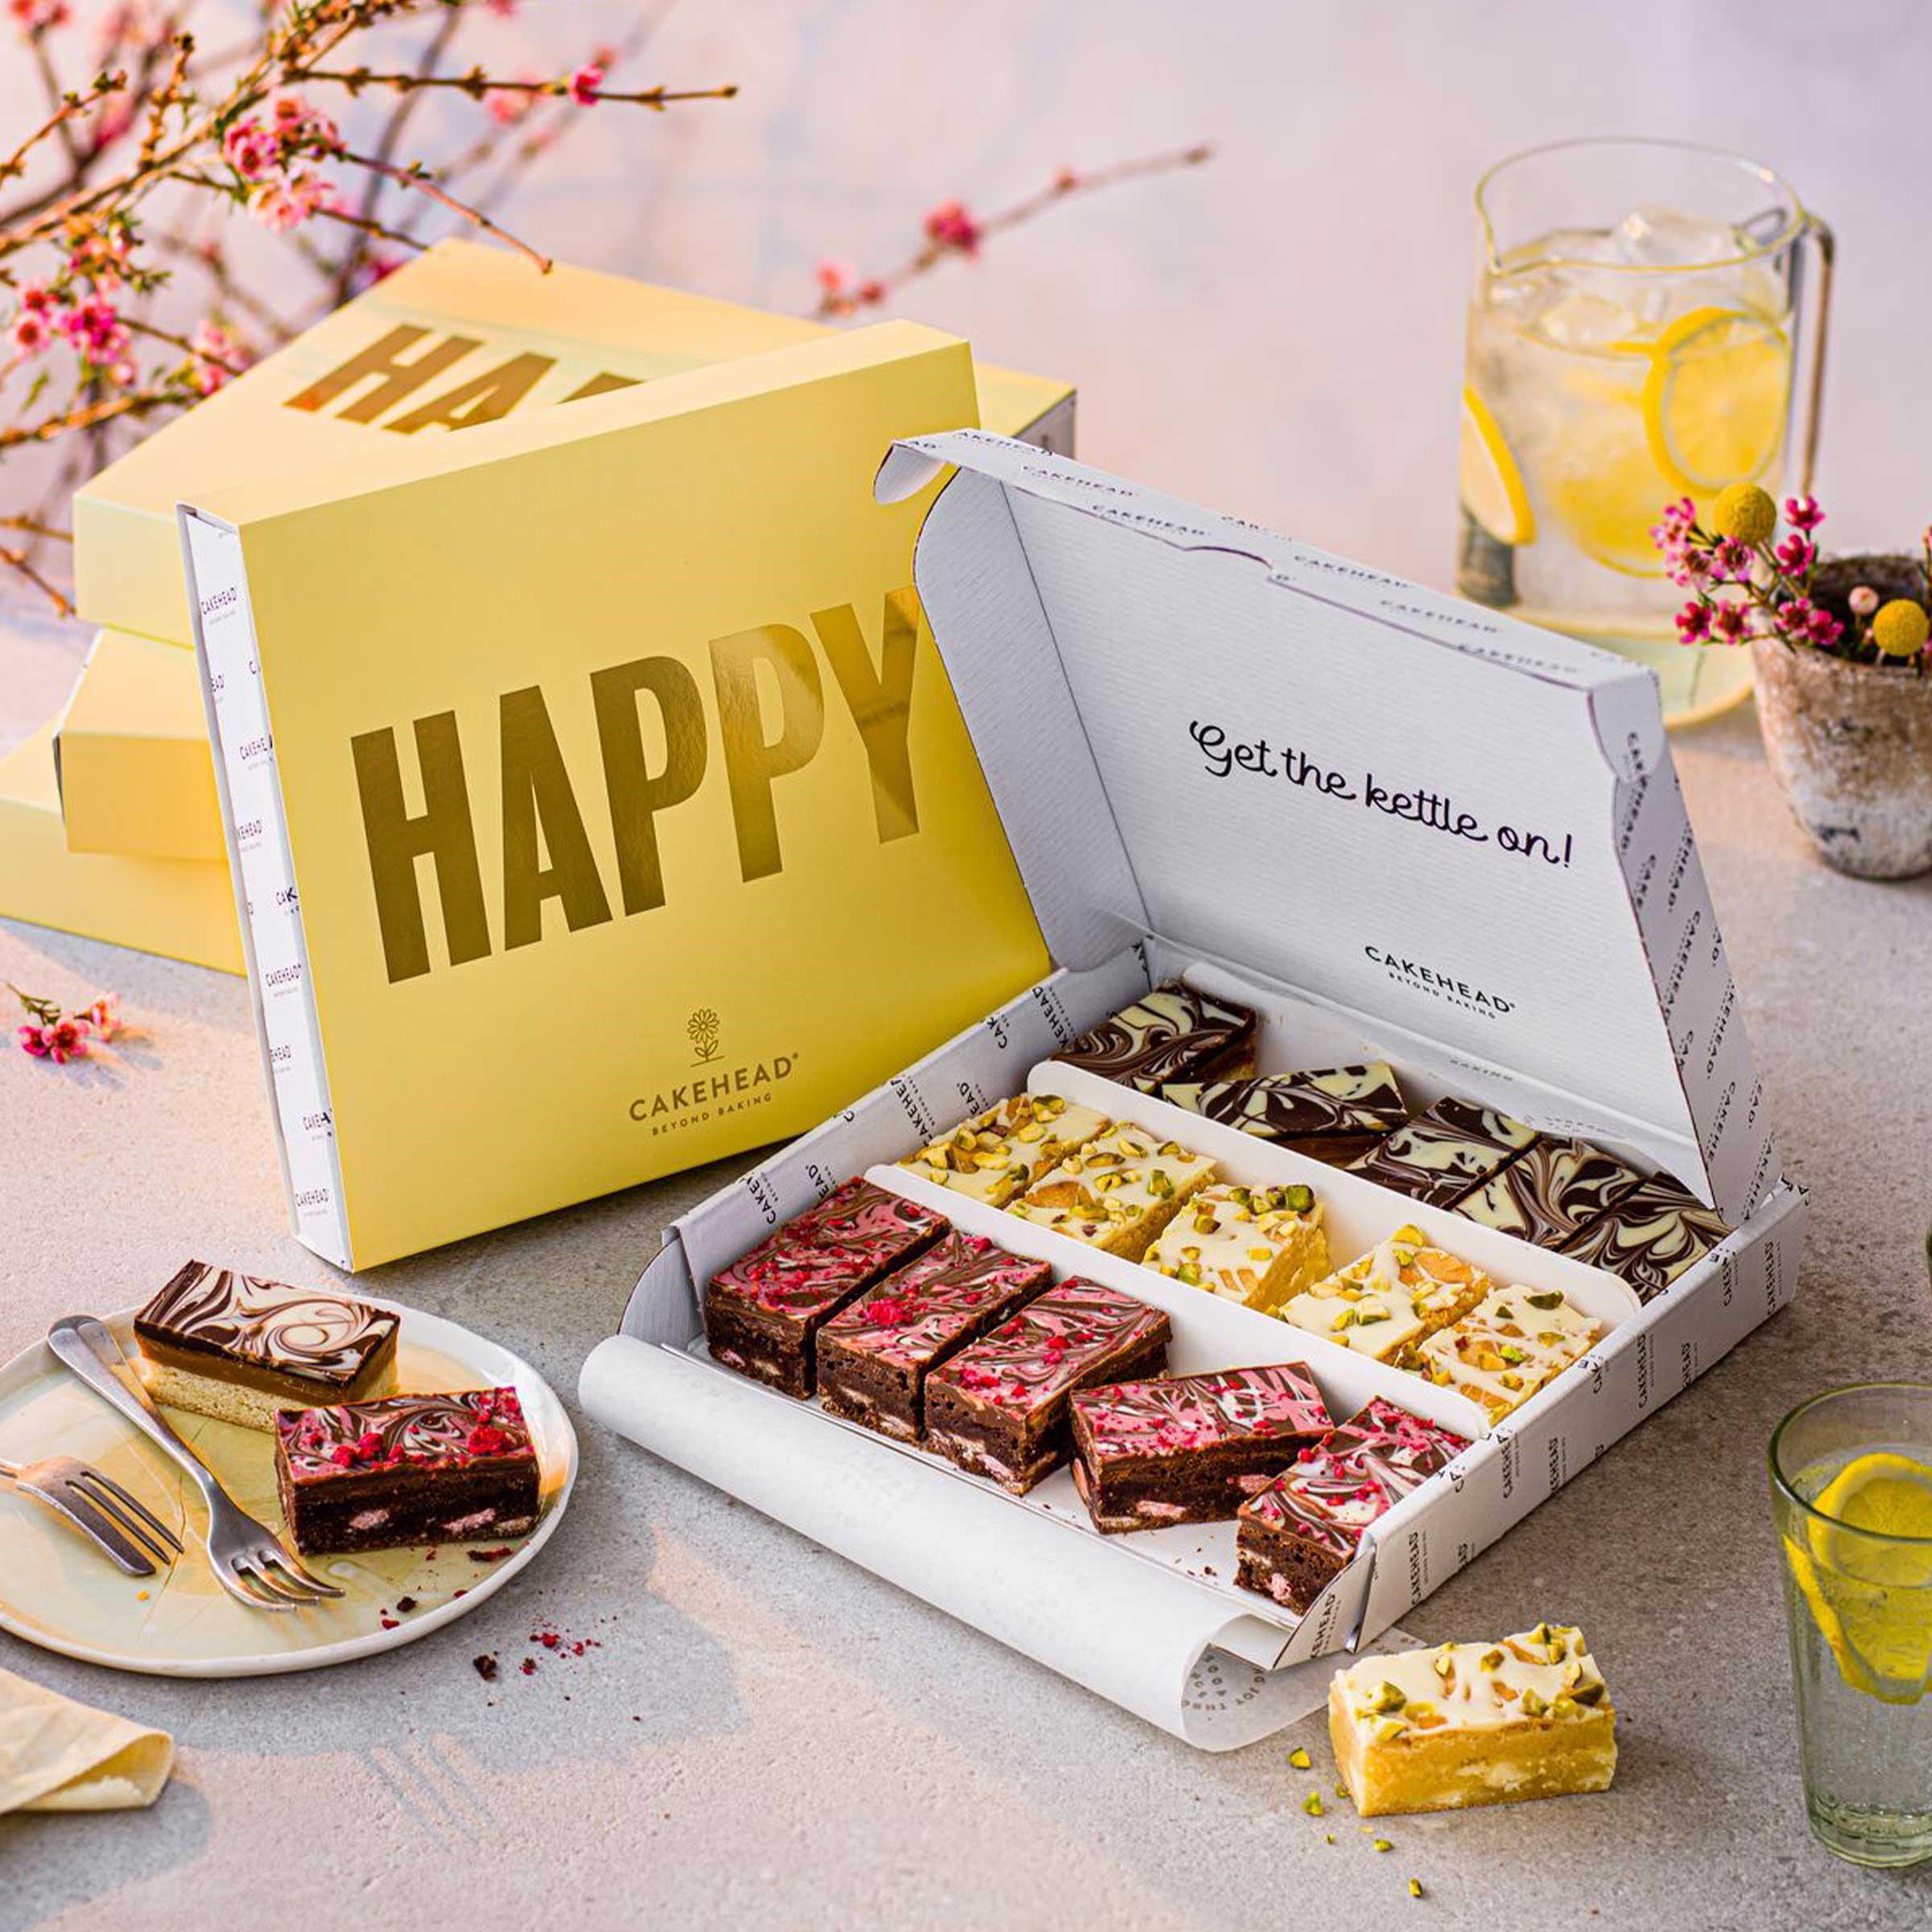 The Happy Box - Cakehead - Perfect For Sending a Treat